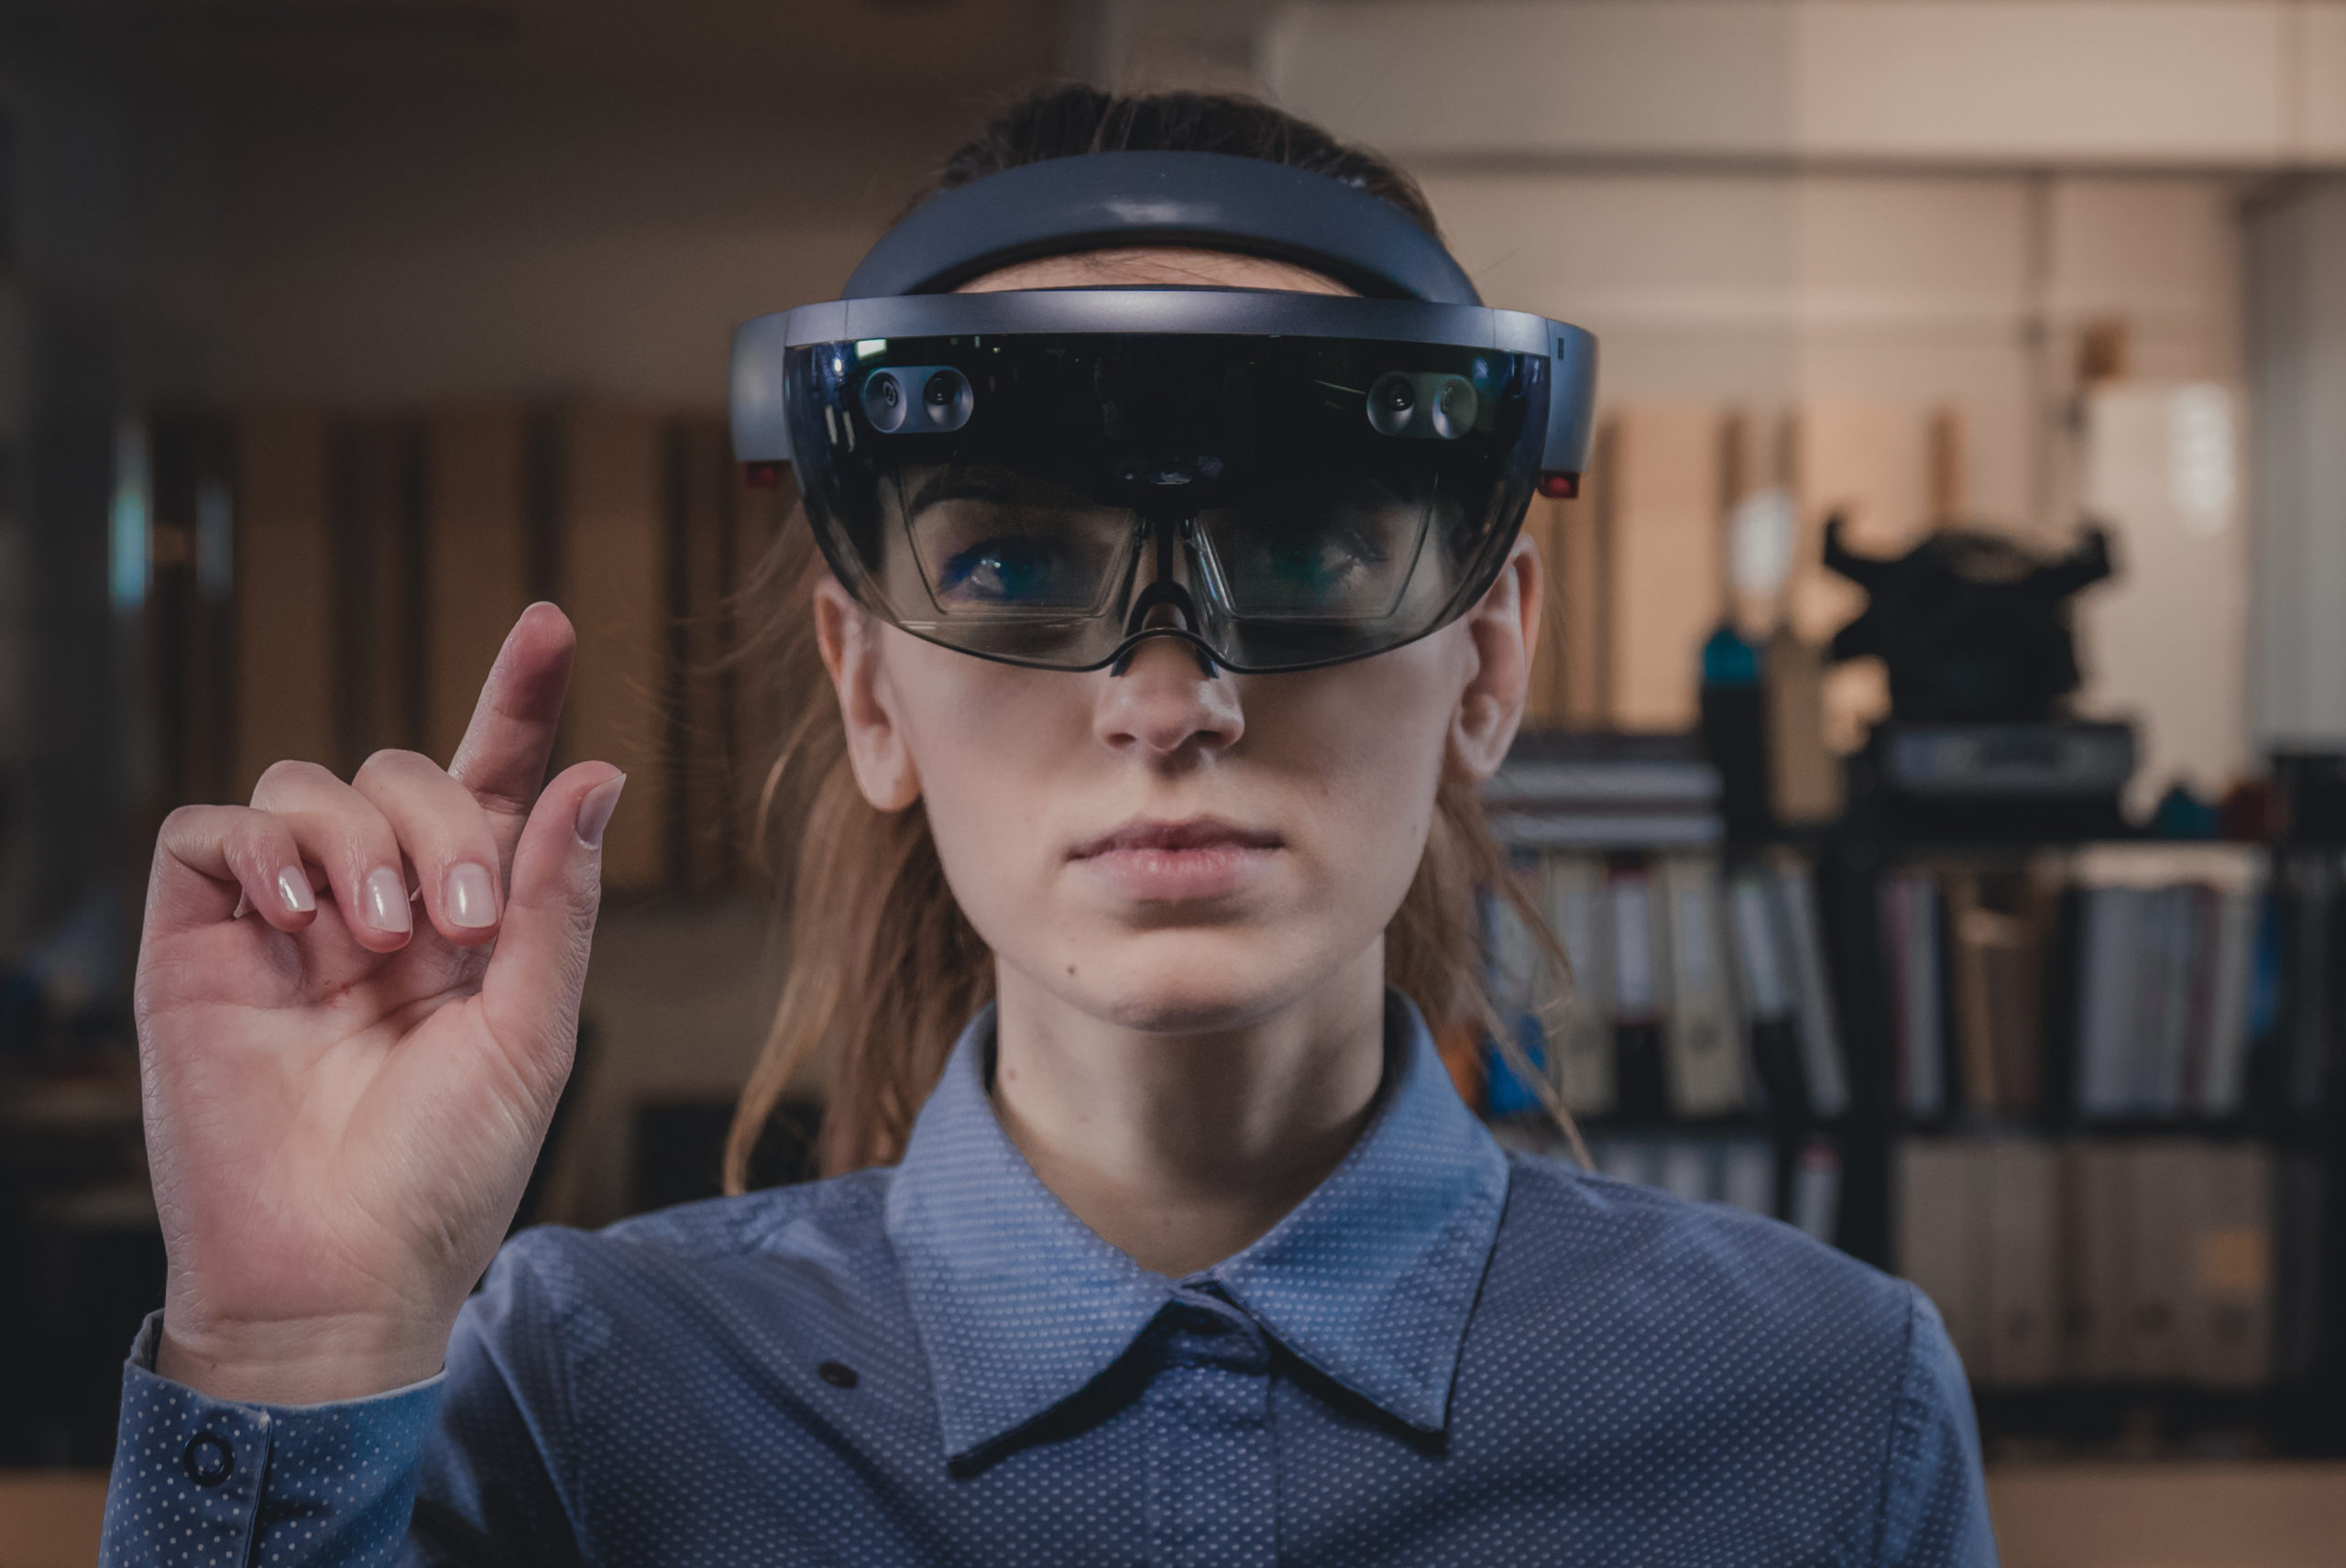 A woman wearing a blue shirt with a HoloLens 2 headset on interacting with AR.